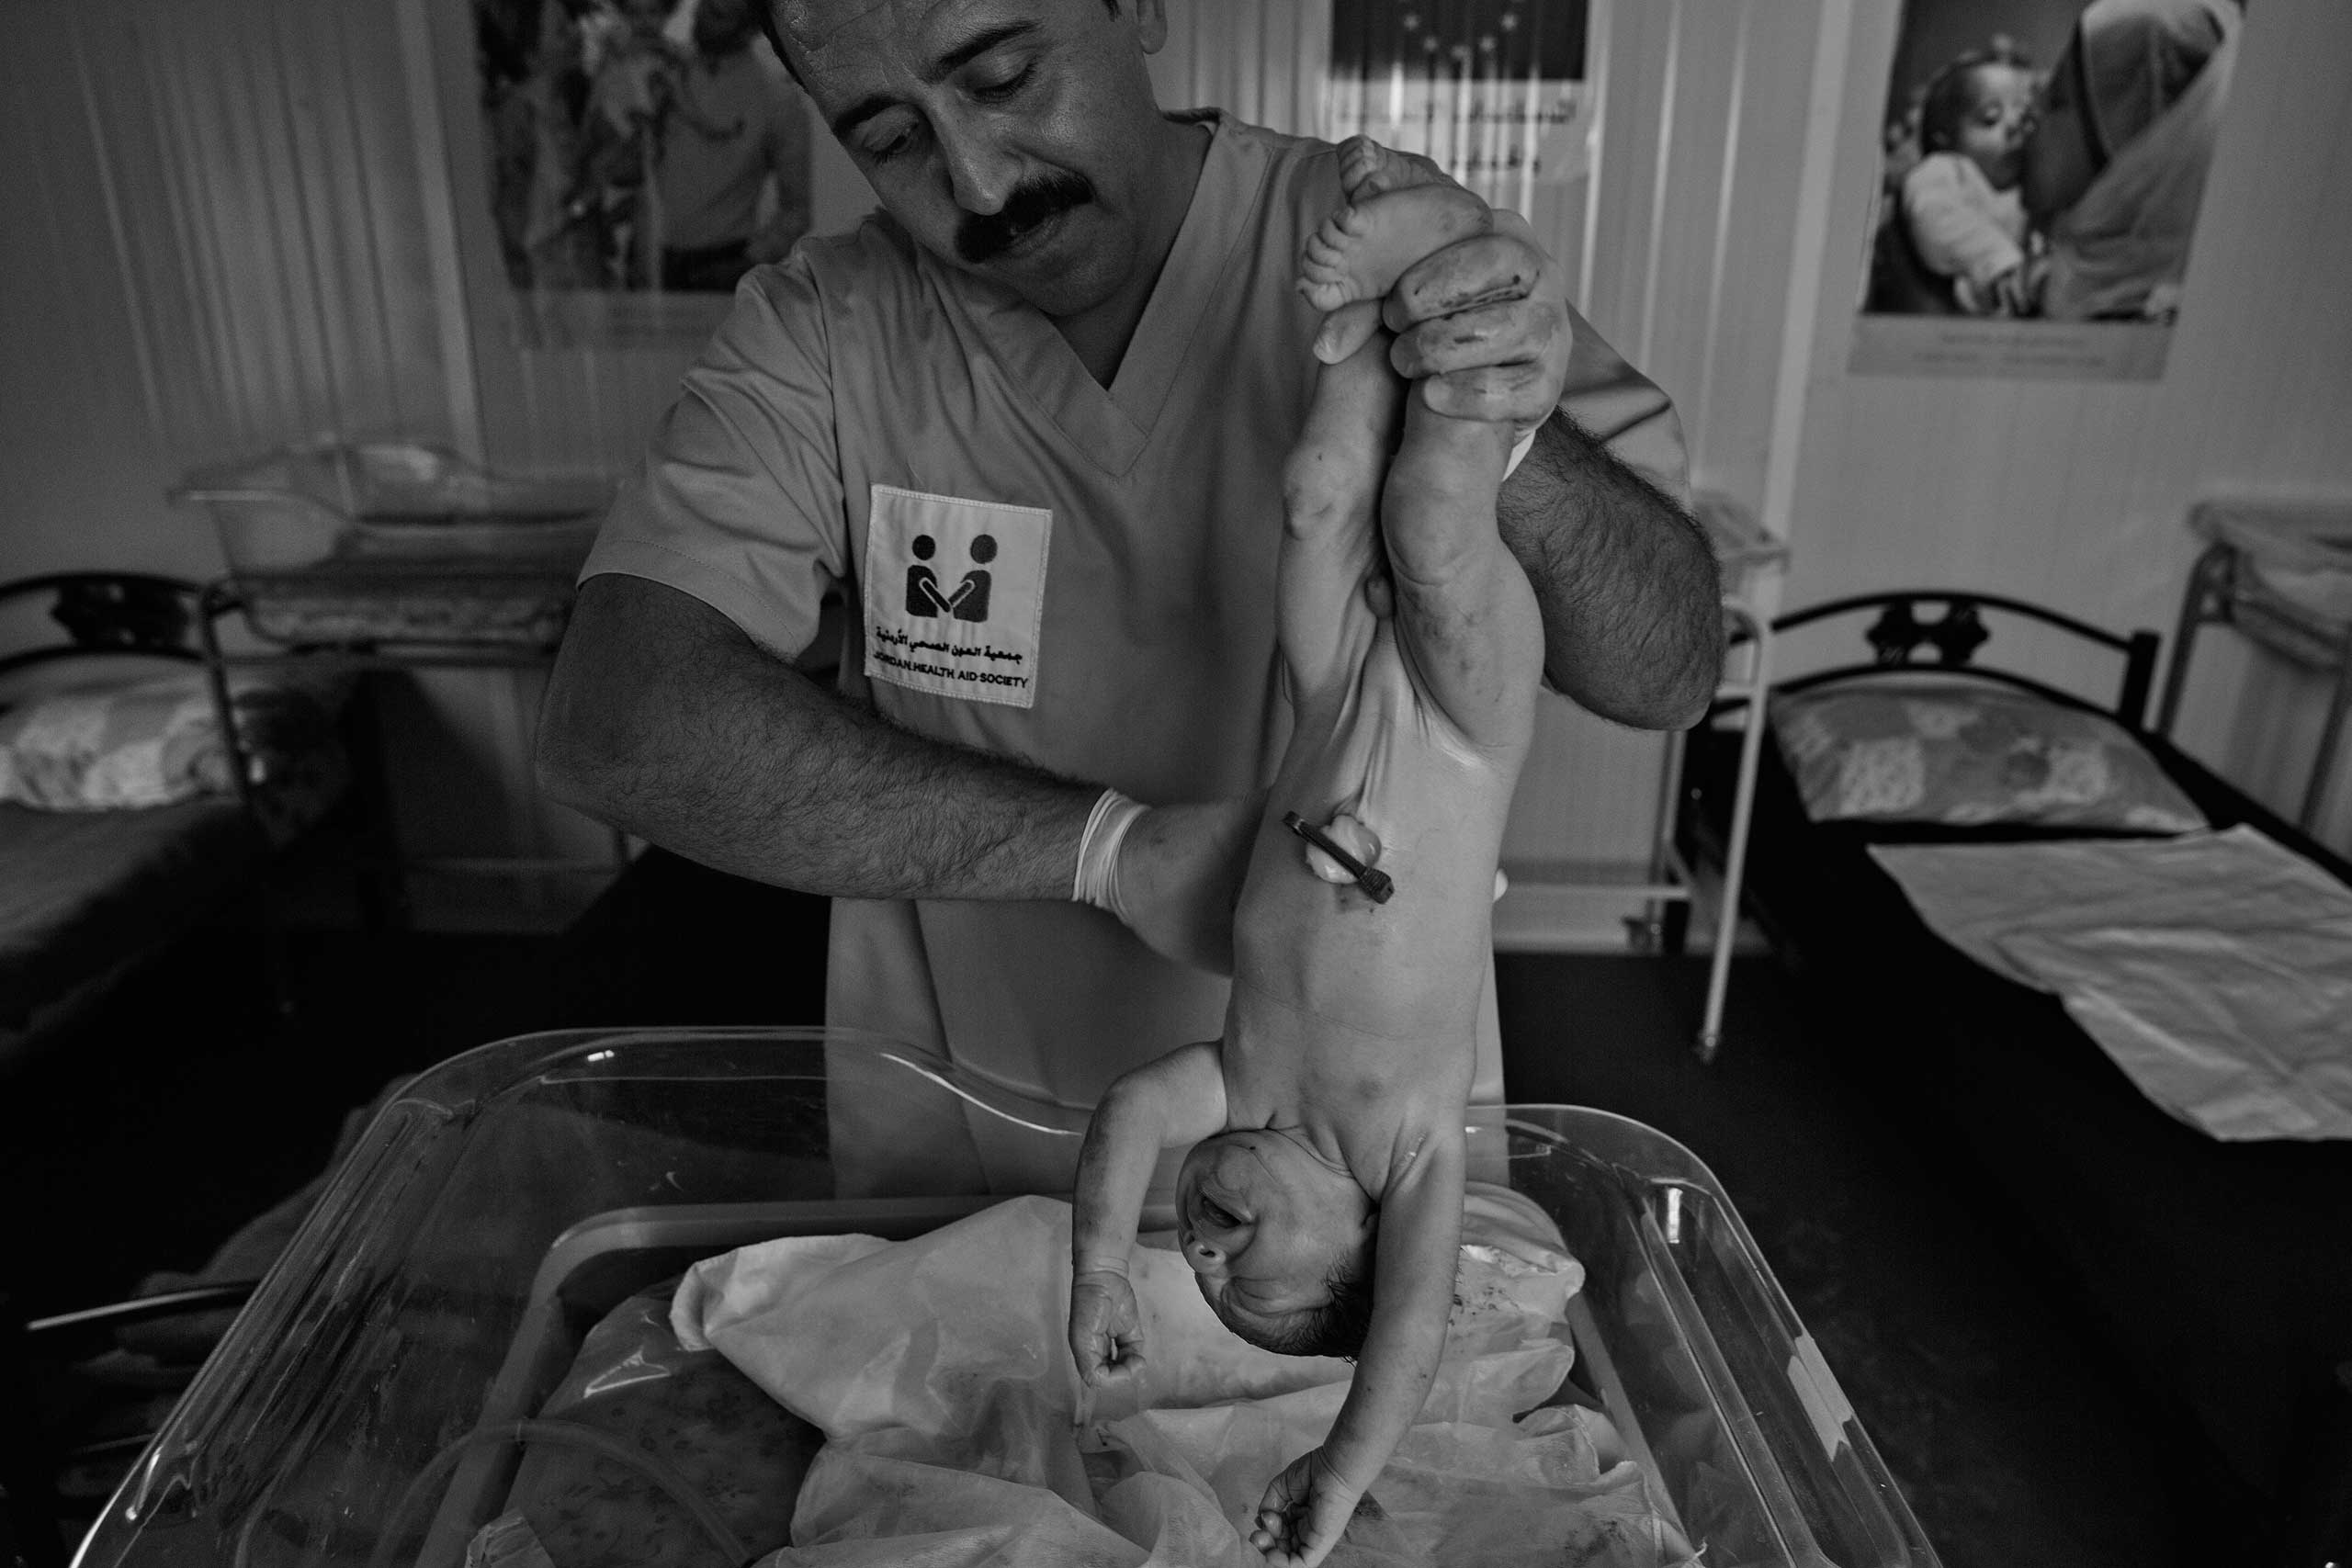 December 2013. Za'atari refugee camp, Jordan. This newborn baby boy was delivered by an NGO doctor assisted by a nurse and later by a member of the baby's family.